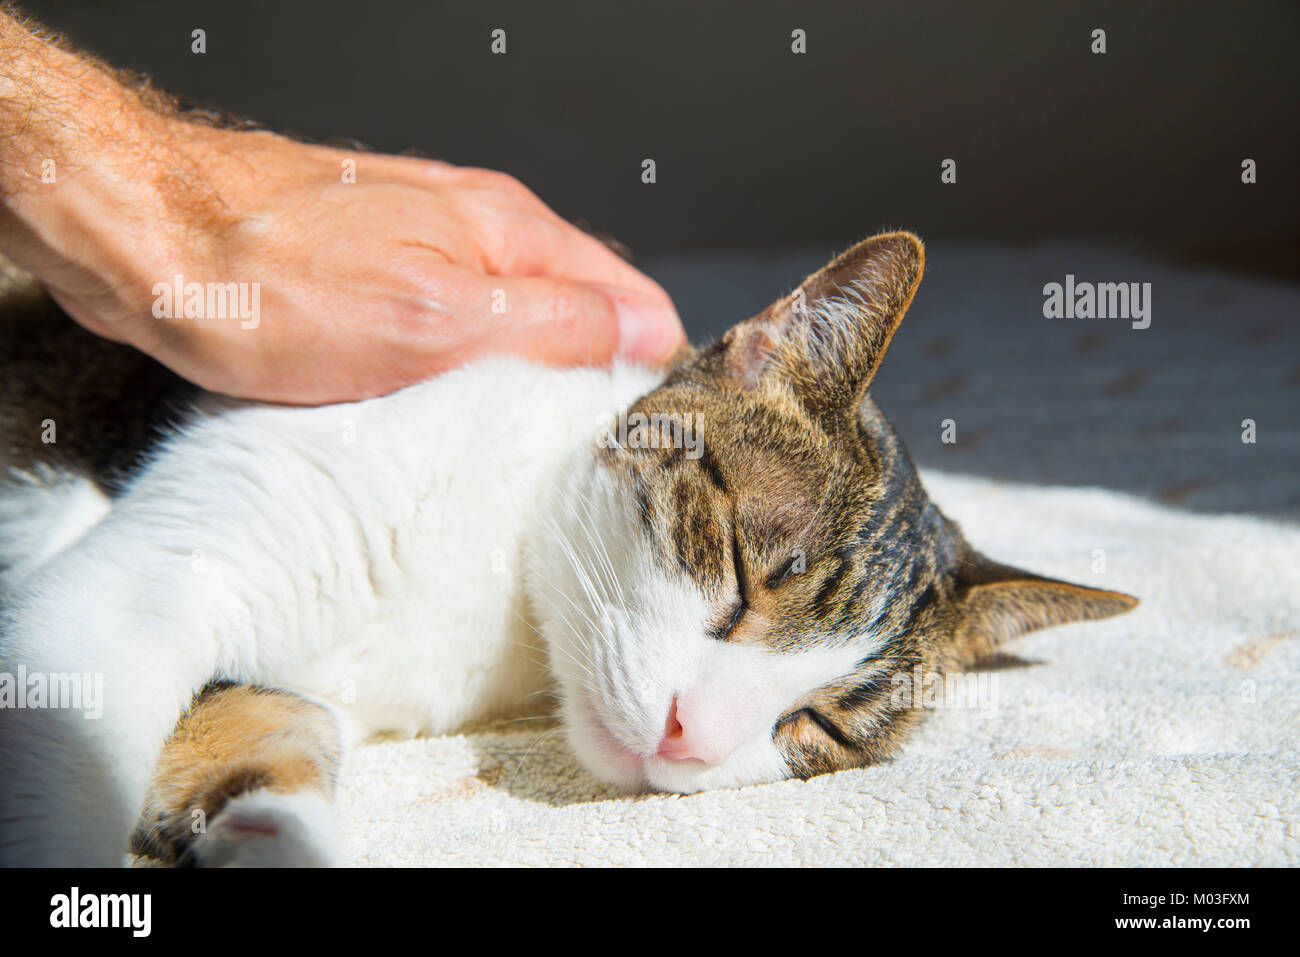 Man's hand stroking a sleepy tabby and white cat. Close view. Stock Photo